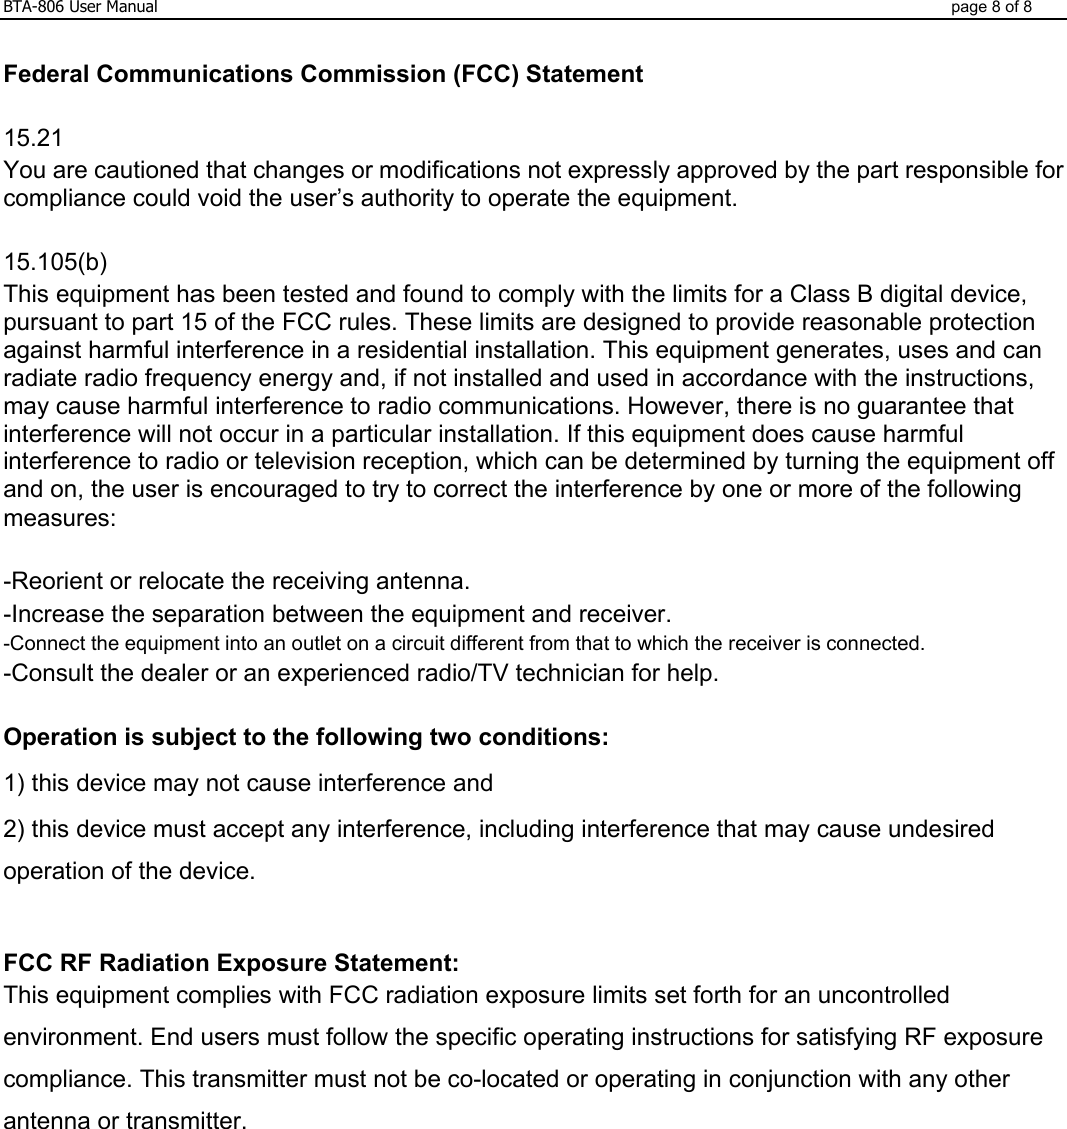 BTA-806 User Manual  page 8 of 8  Federal Communications Commission (FCC) Statement  15.21 You are cautioned that changes or modifications not expressly approved by the part responsible for compliance could void the user’s authority to operate the equipment.  15.105(b) This equipment has been tested and found to comply with the limits for a Class B digital device, pursuant to part 15 of the FCC rules. These limits are designed to provide reasonable protection against harmful interference in a residential installation. This equipment generates, uses and can radiate radio frequency energy and, if not installed and used in accordance with the instructions, may cause harmful interference to radio communications. However, there is no guarantee that interference will not occur in a particular installation. If this equipment does cause harmful interference to radio or television reception, which can be determined by turning the equipment off and on, the user is encouraged to try to correct the interference by one or more of the following measures:  -Reorient or relocate the receiving antenna. -Increase the separation between the equipment and receiver. -Connect the equipment into an outlet on a circuit different from that to which the receiver is connected. -Consult the dealer or an experienced radio/TV technician for help.  Operation is subject to the following two conditions: 1) this device may not cause interference and 2) this device must accept any interference, including interference that may cause undesired operation of the device.  FCC RF Radiation Exposure Statement: This equipment complies with FCC radiation exposure limits set forth for an uncontrolled environment. End users must follow the specific operating instructions for satisfying RF exposure compliance. This transmitter must not be co-located or operating in conjunction with any other antenna or transmitter.    